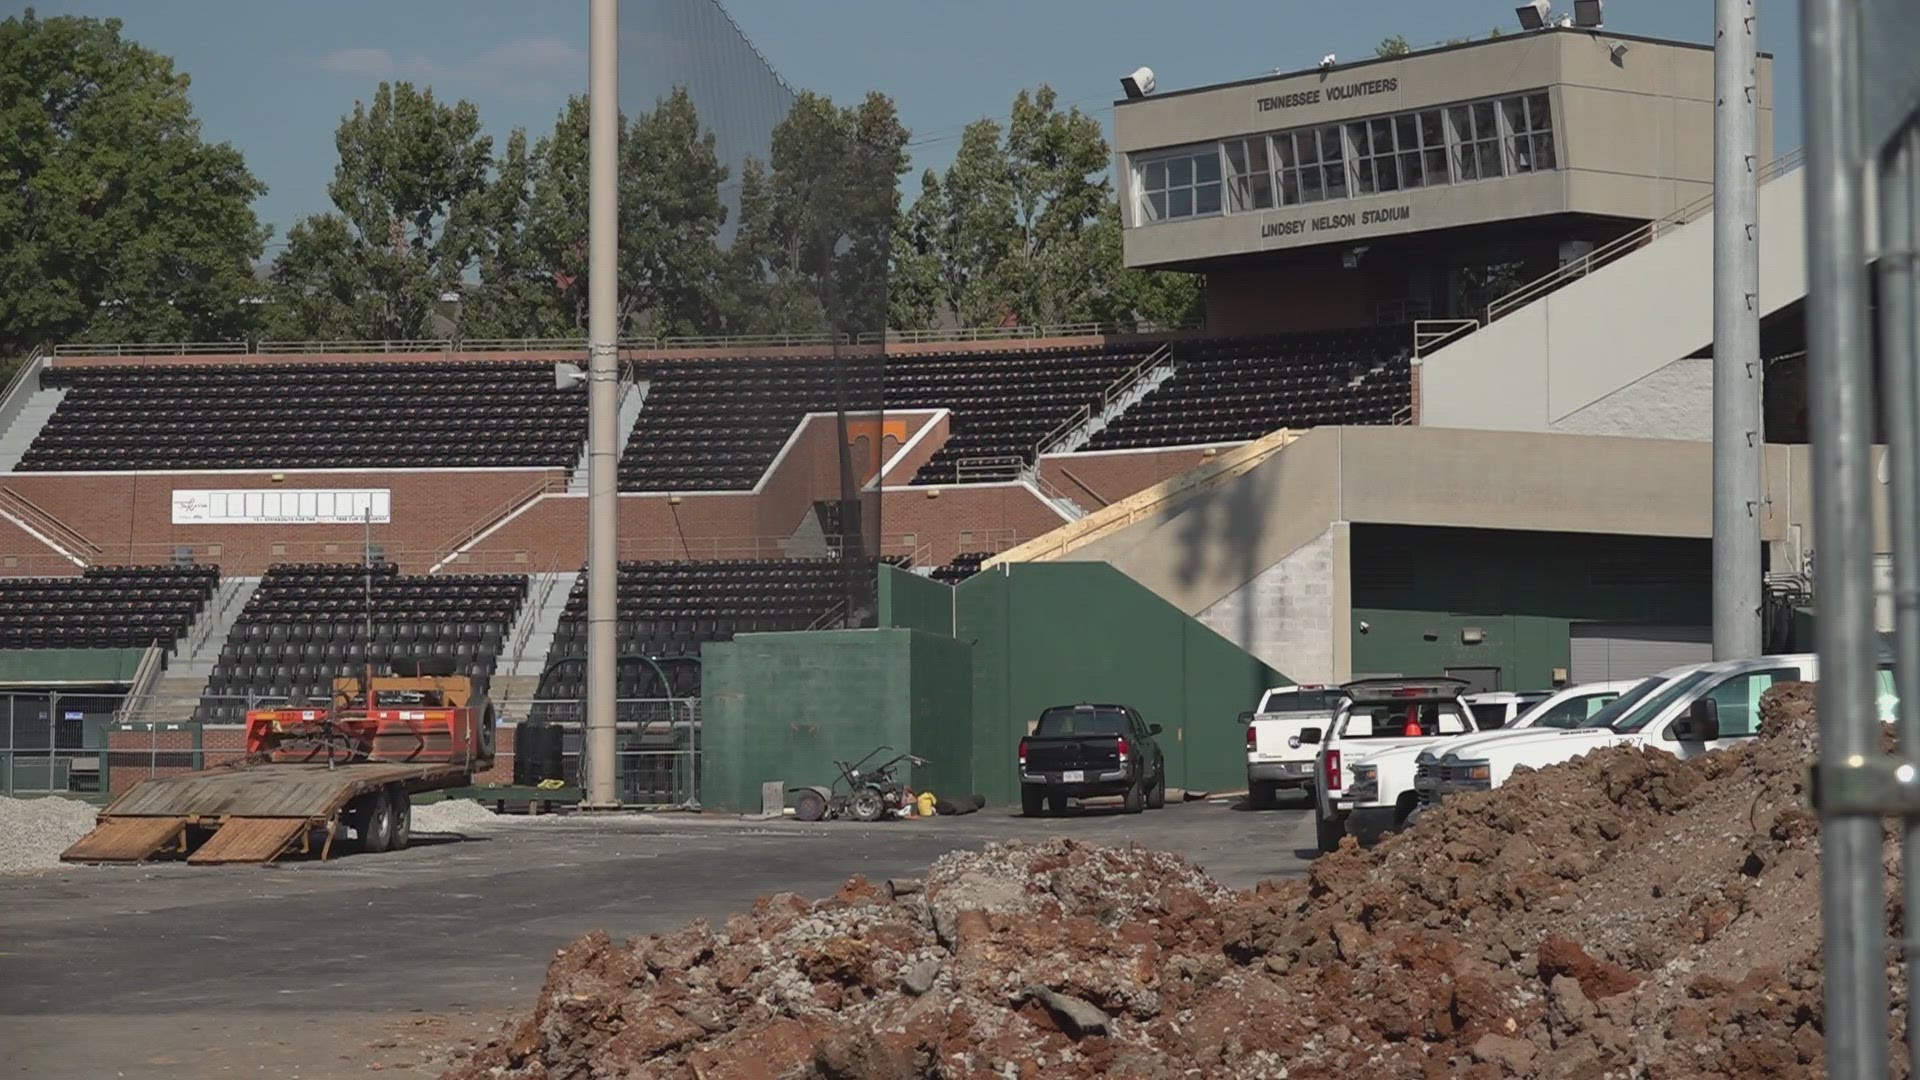 The stadium is home to Tennessee Baseball and is seeing major renovations.